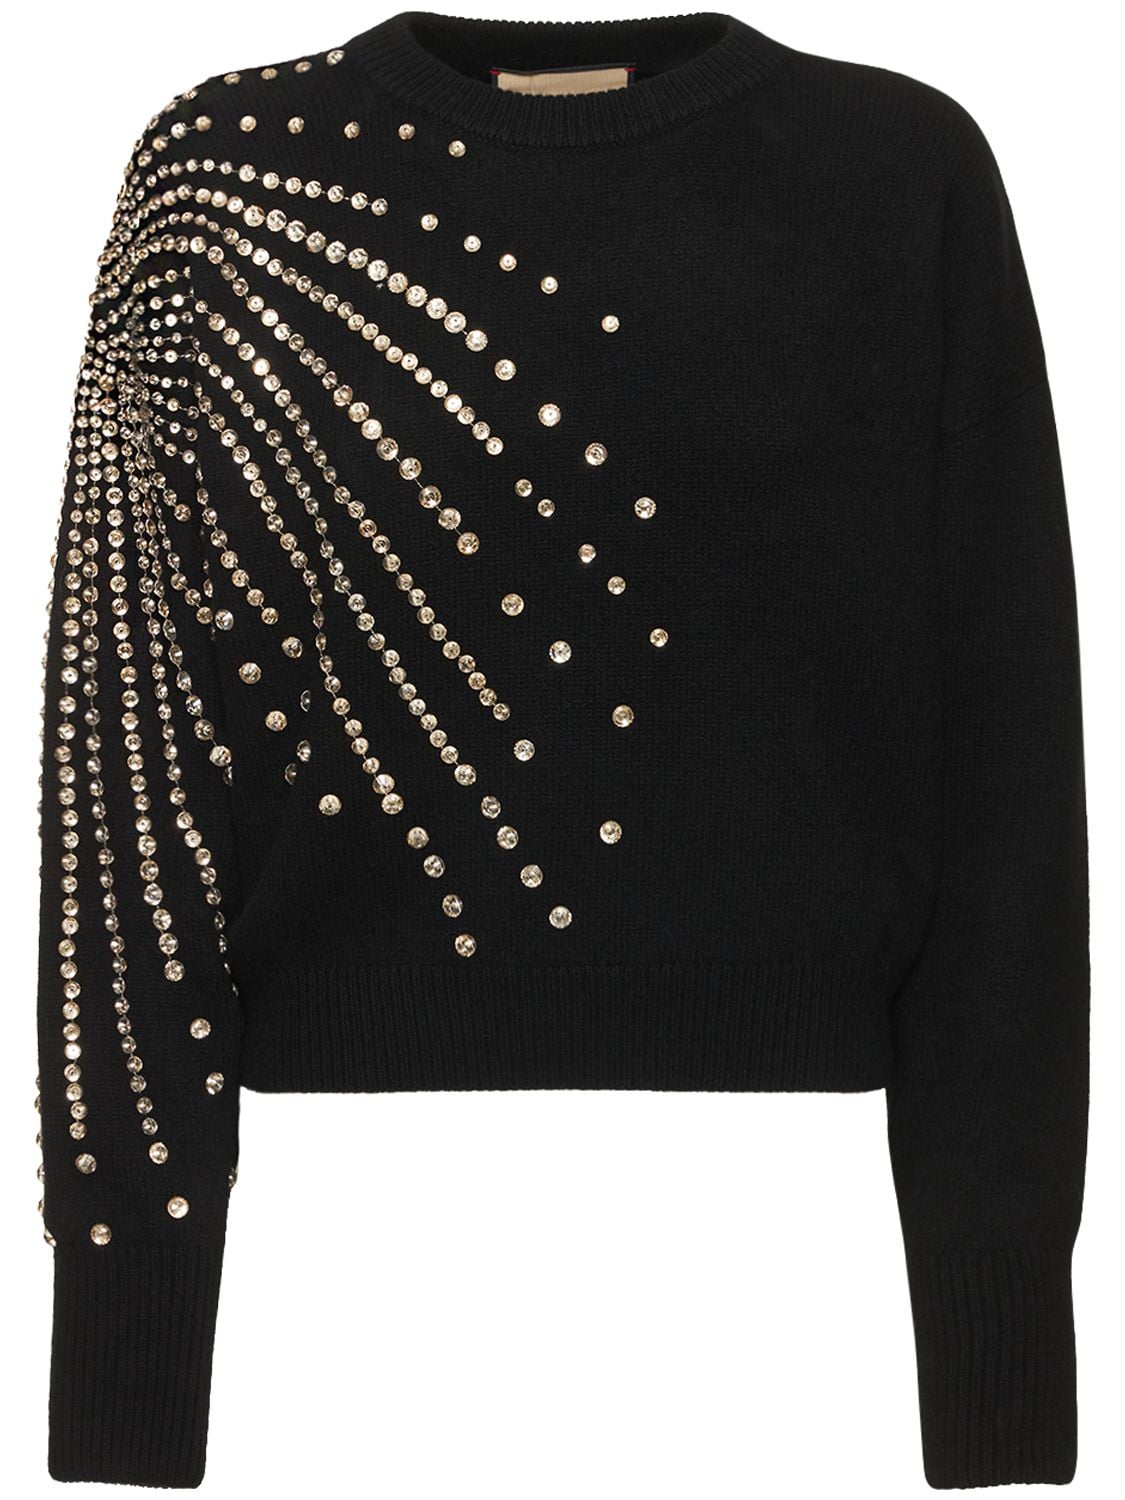 GUCCI Embellished Wool Blend Sweater